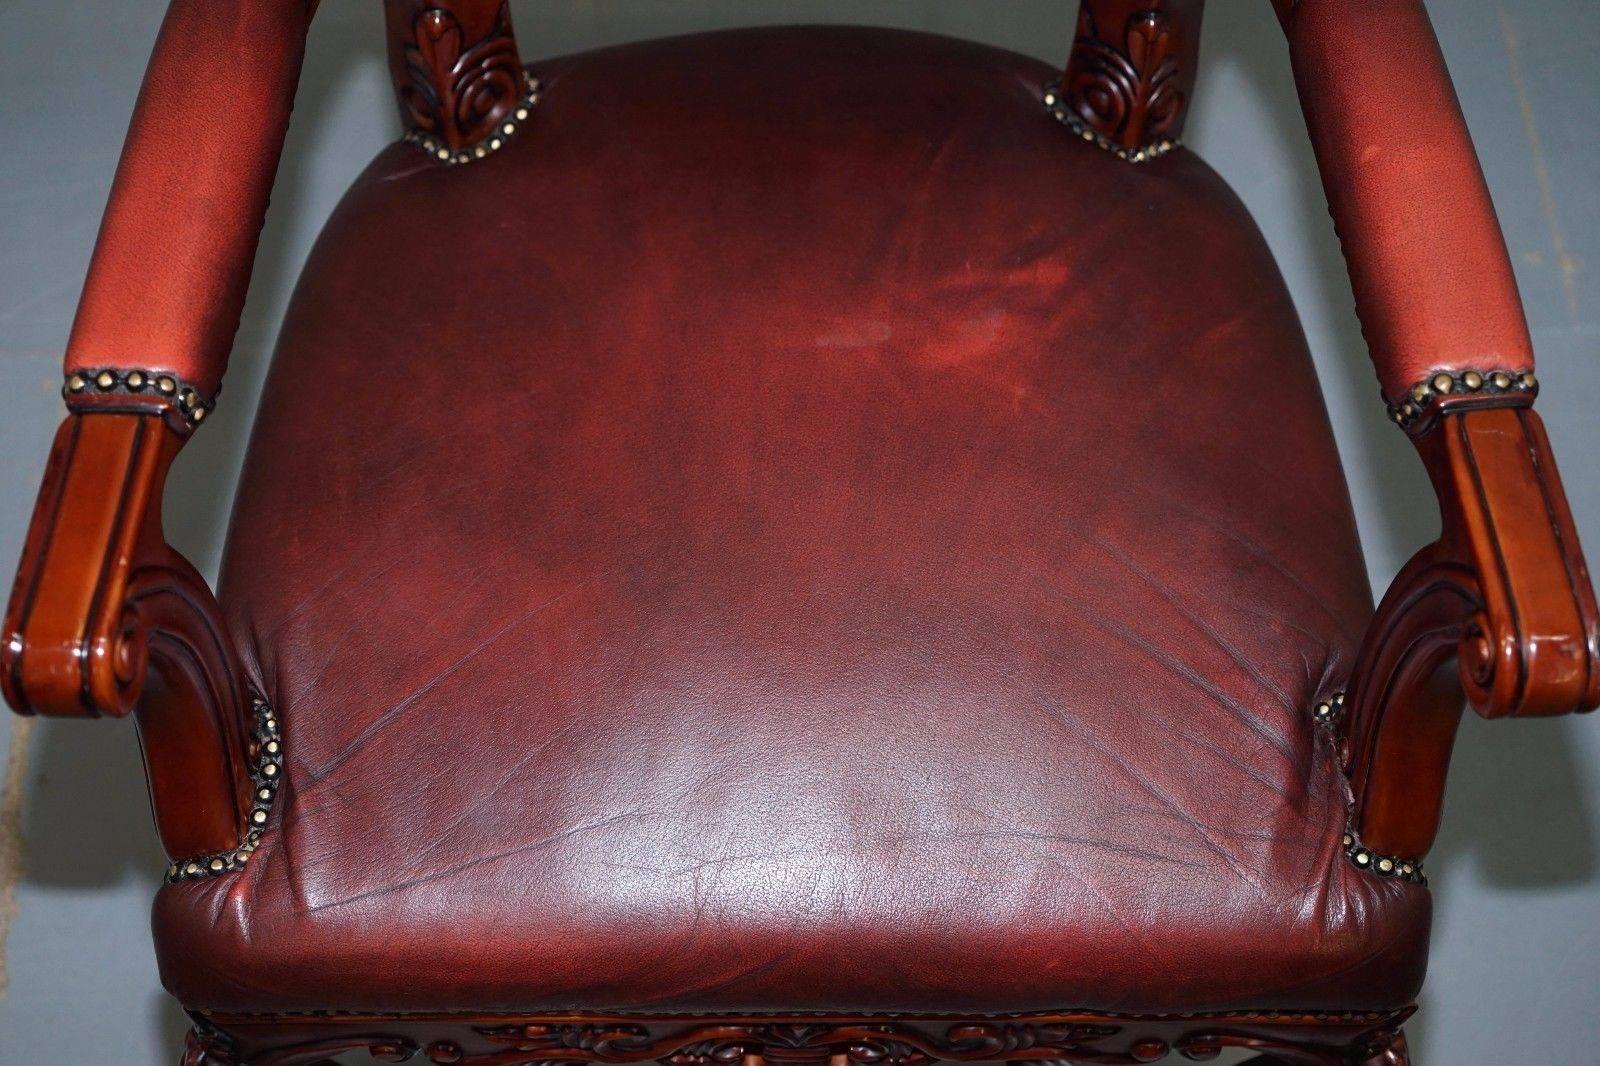 We are delighted to offer for auction this lovely pair of solid pine framed with oxblood leather Chesterfield oversized French Louis style carver armchairs

A really good looking and well-made pair, the upholstery is in tidy order throughout, the